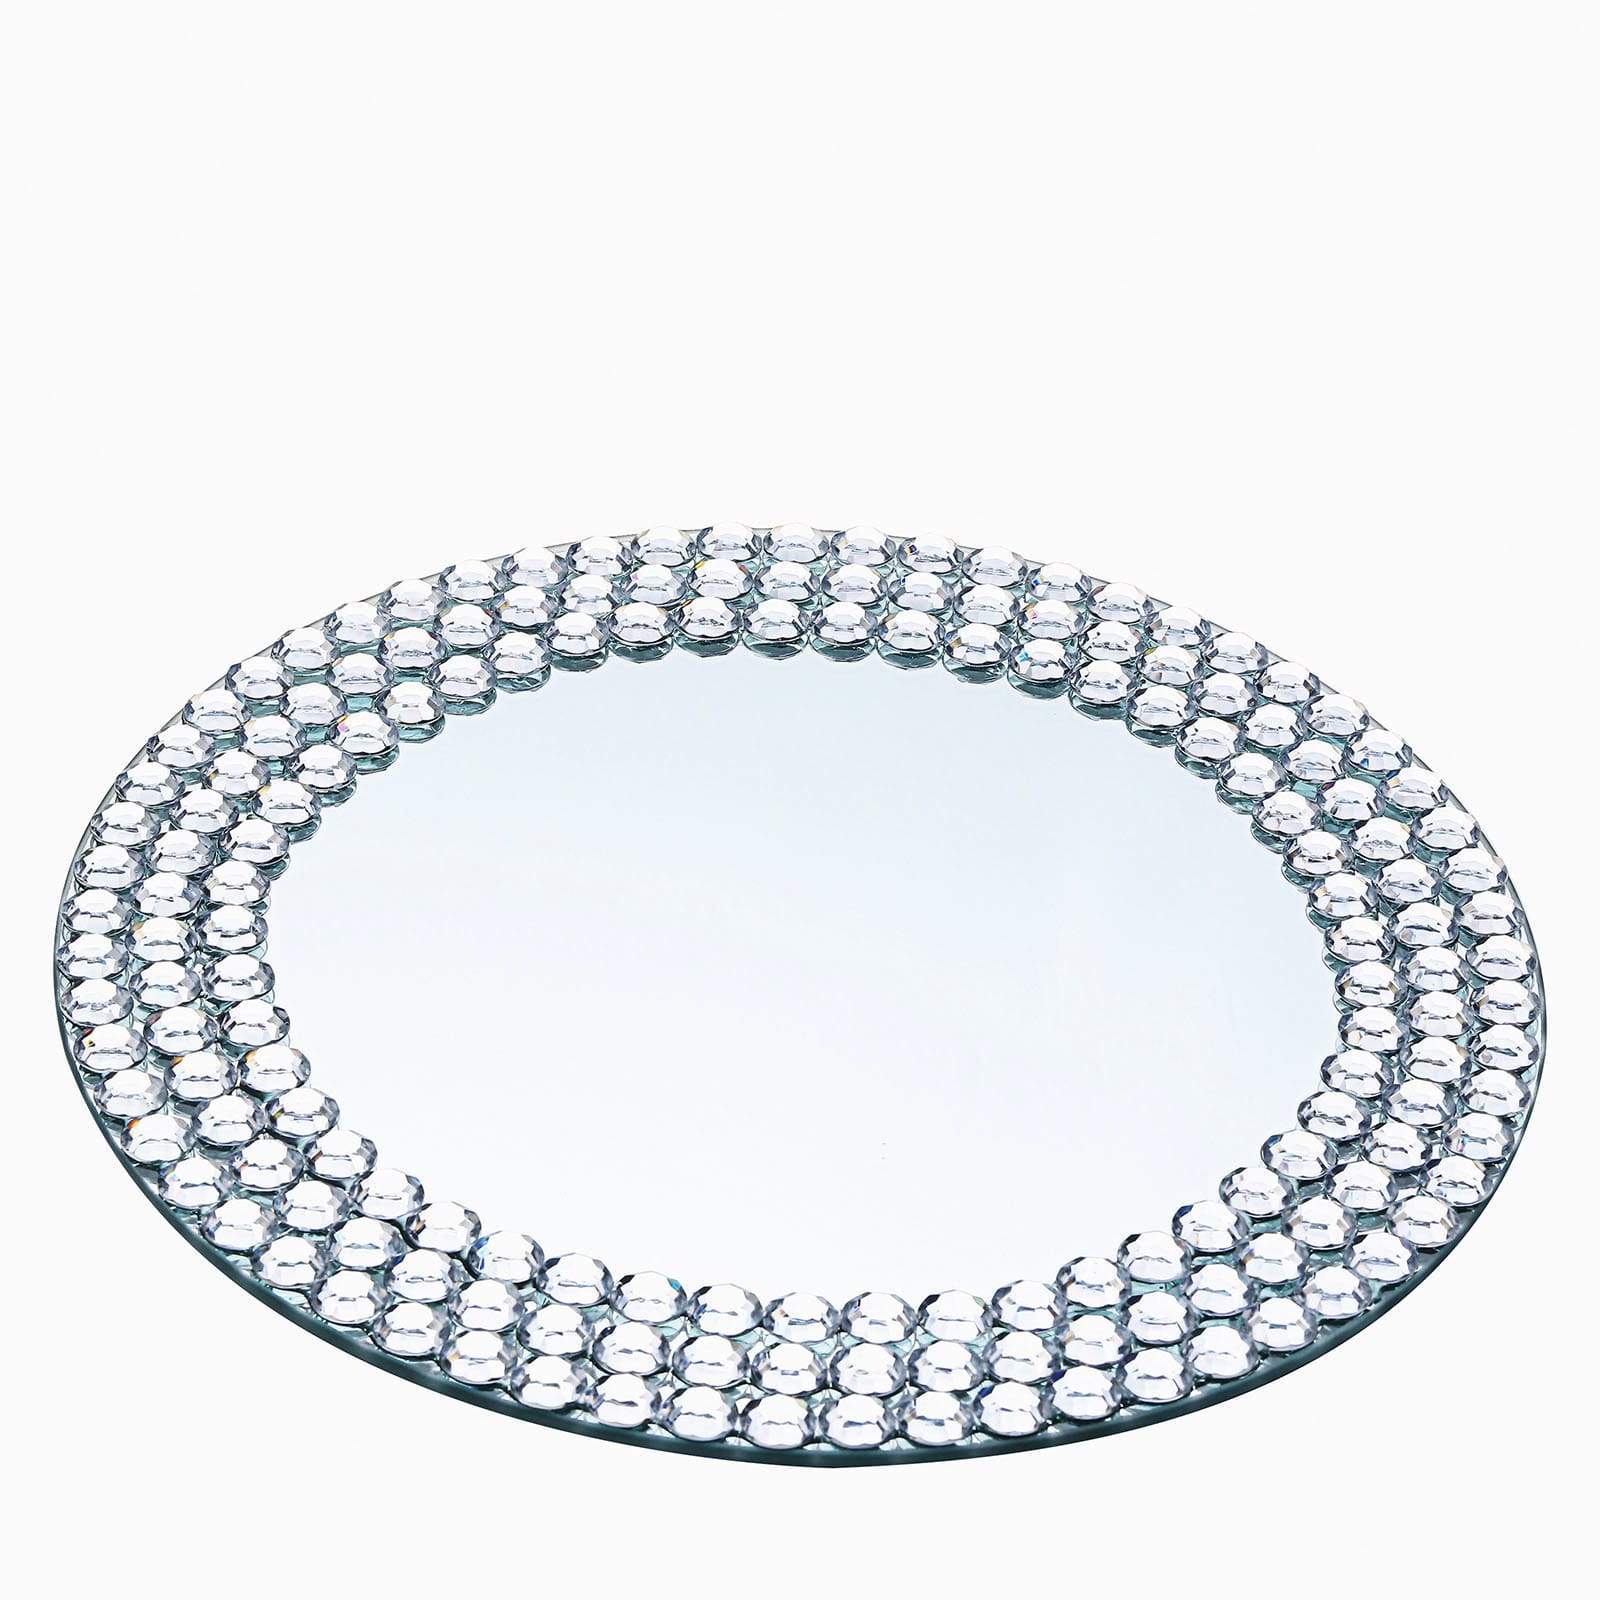 2 Silver 13 in Round Mirror Glass Charger Plates with Diamond Trim